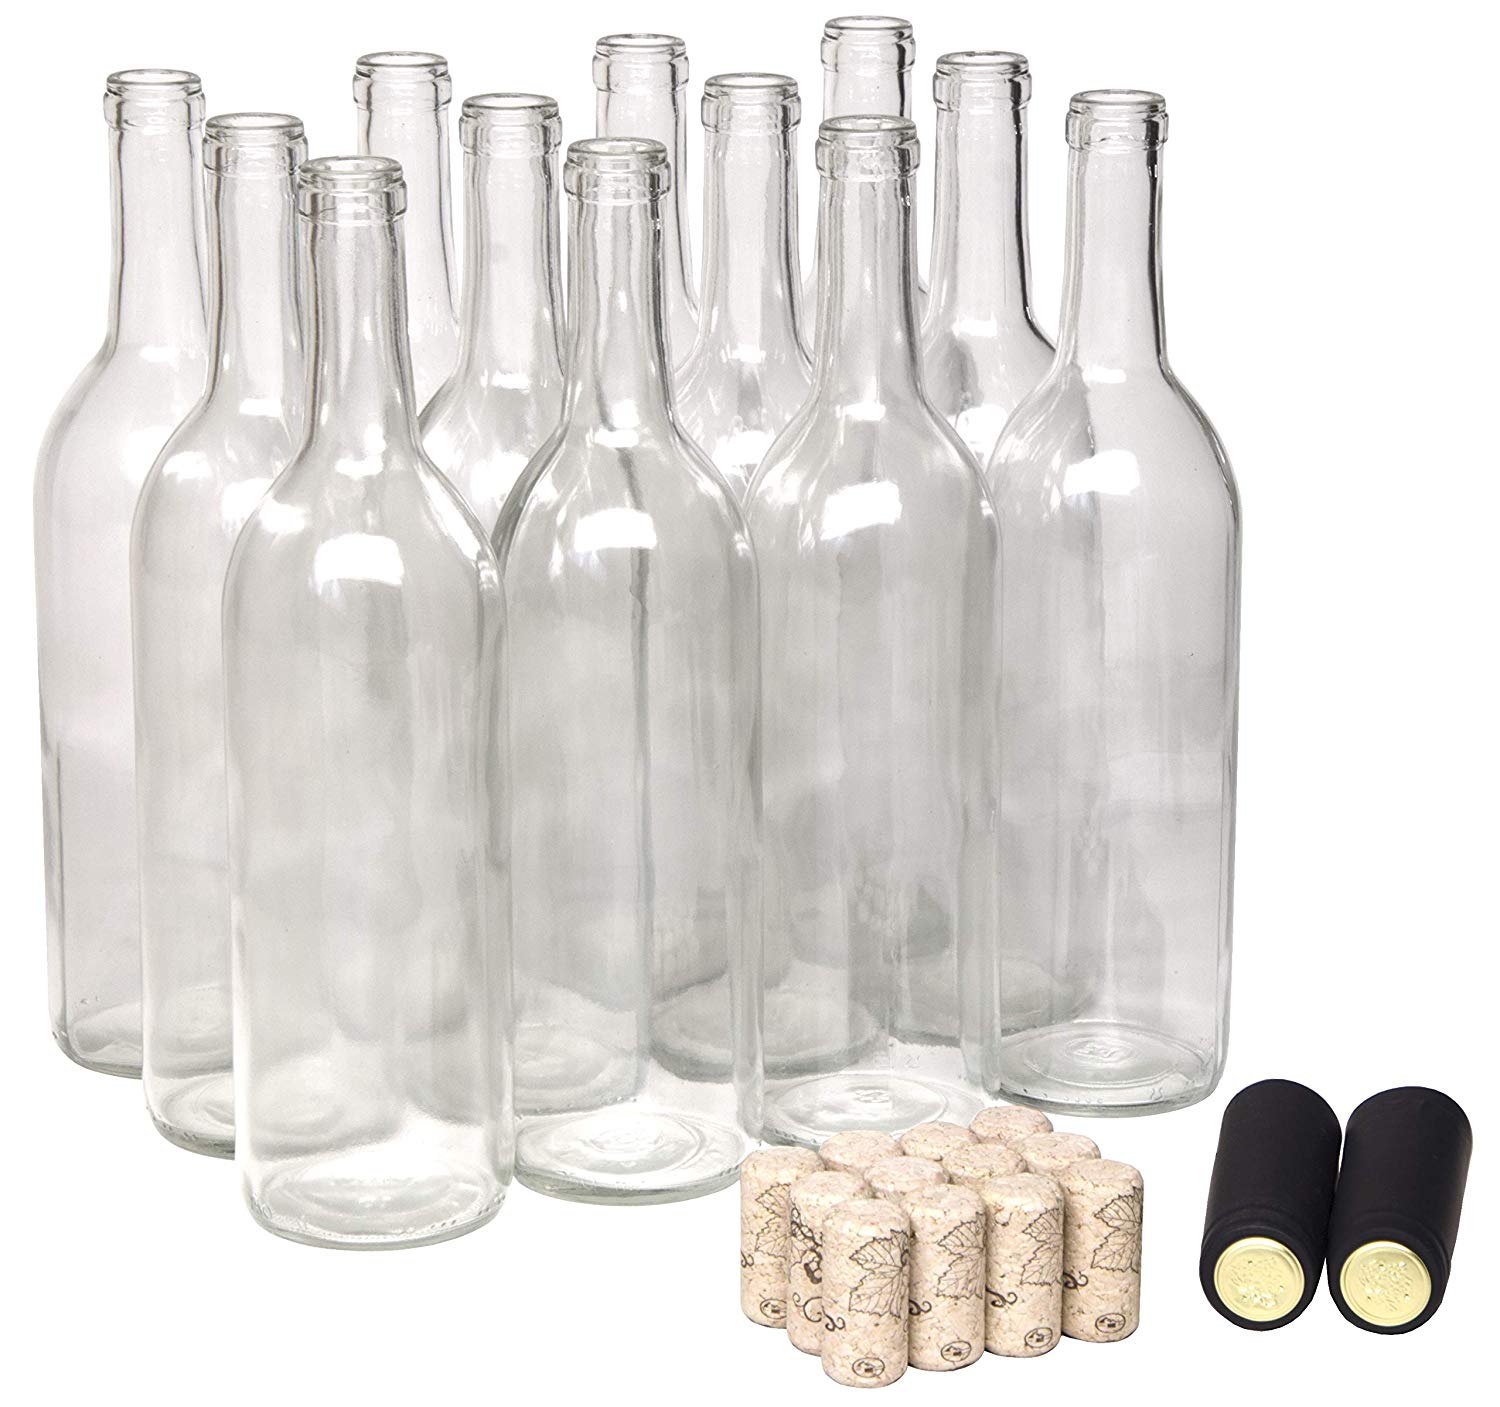 North Mountain Supply - W5CTCL-BKP 750ml Clear Glass Bordeaux Wine Bottle Flat-bottomed Screw-Top Finish - with 28mm Black Plastic Lids - Case of 12